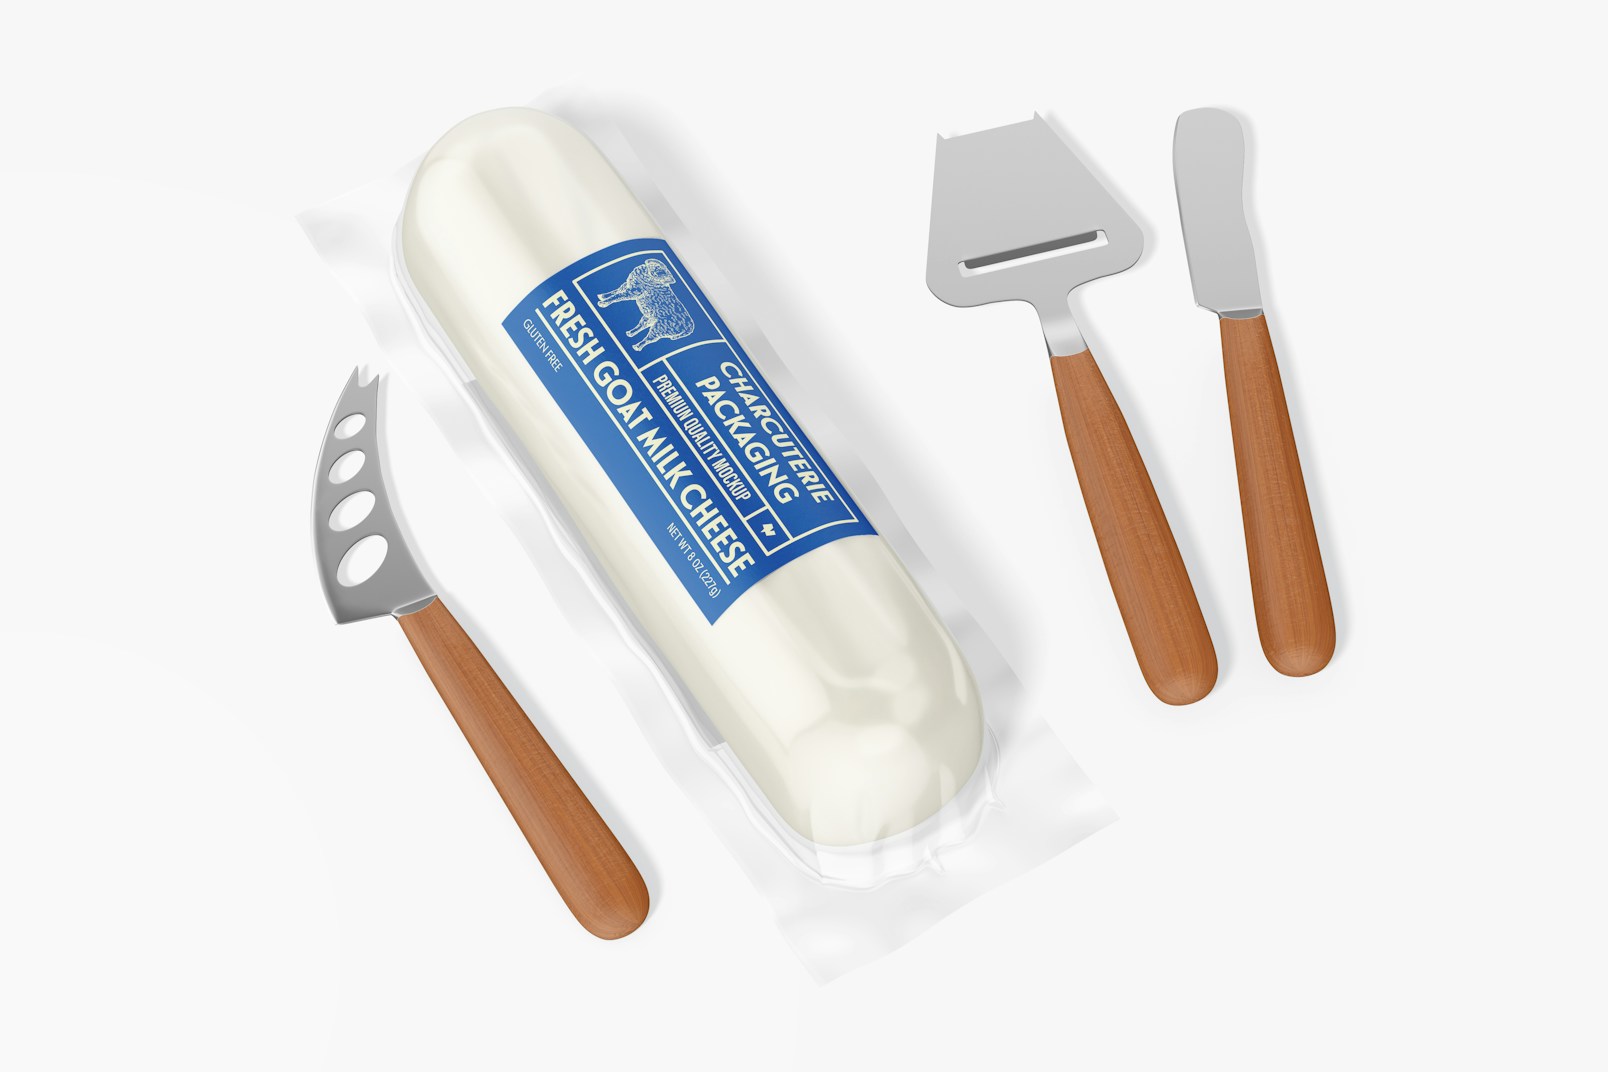 Goat Cheese Packaging Mockup, with Cutlery